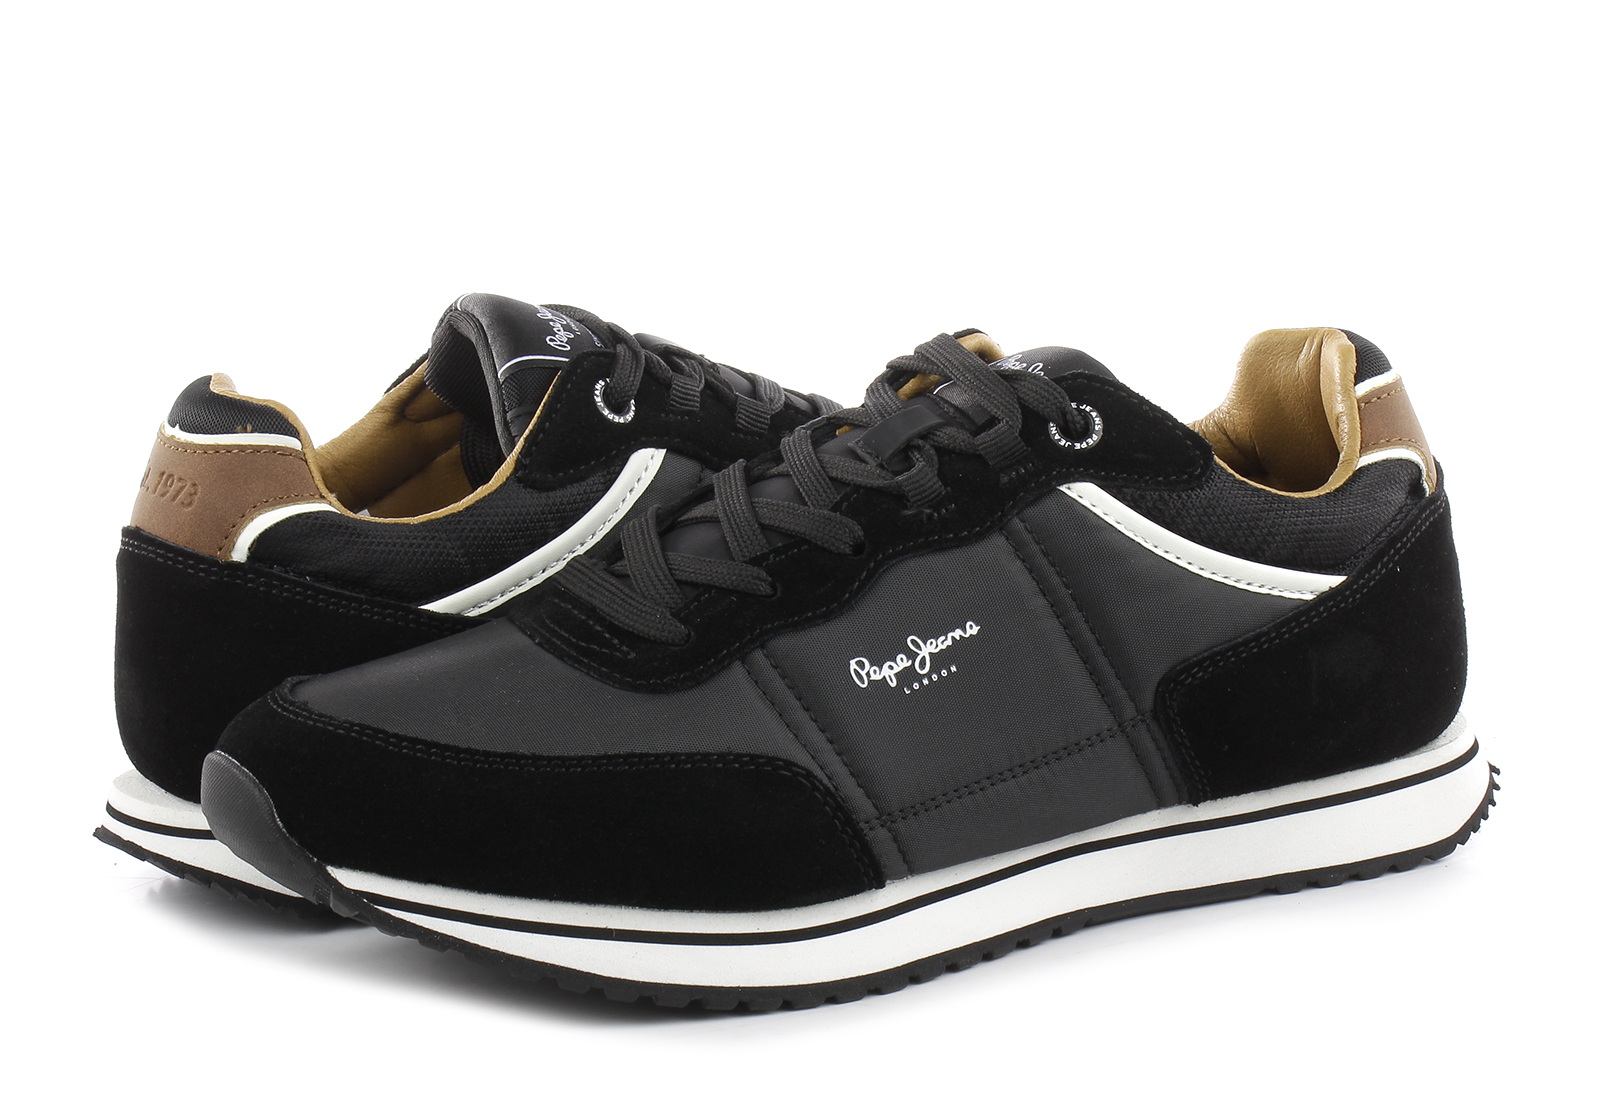 Pepe Jeans Sneaker Tour Classic